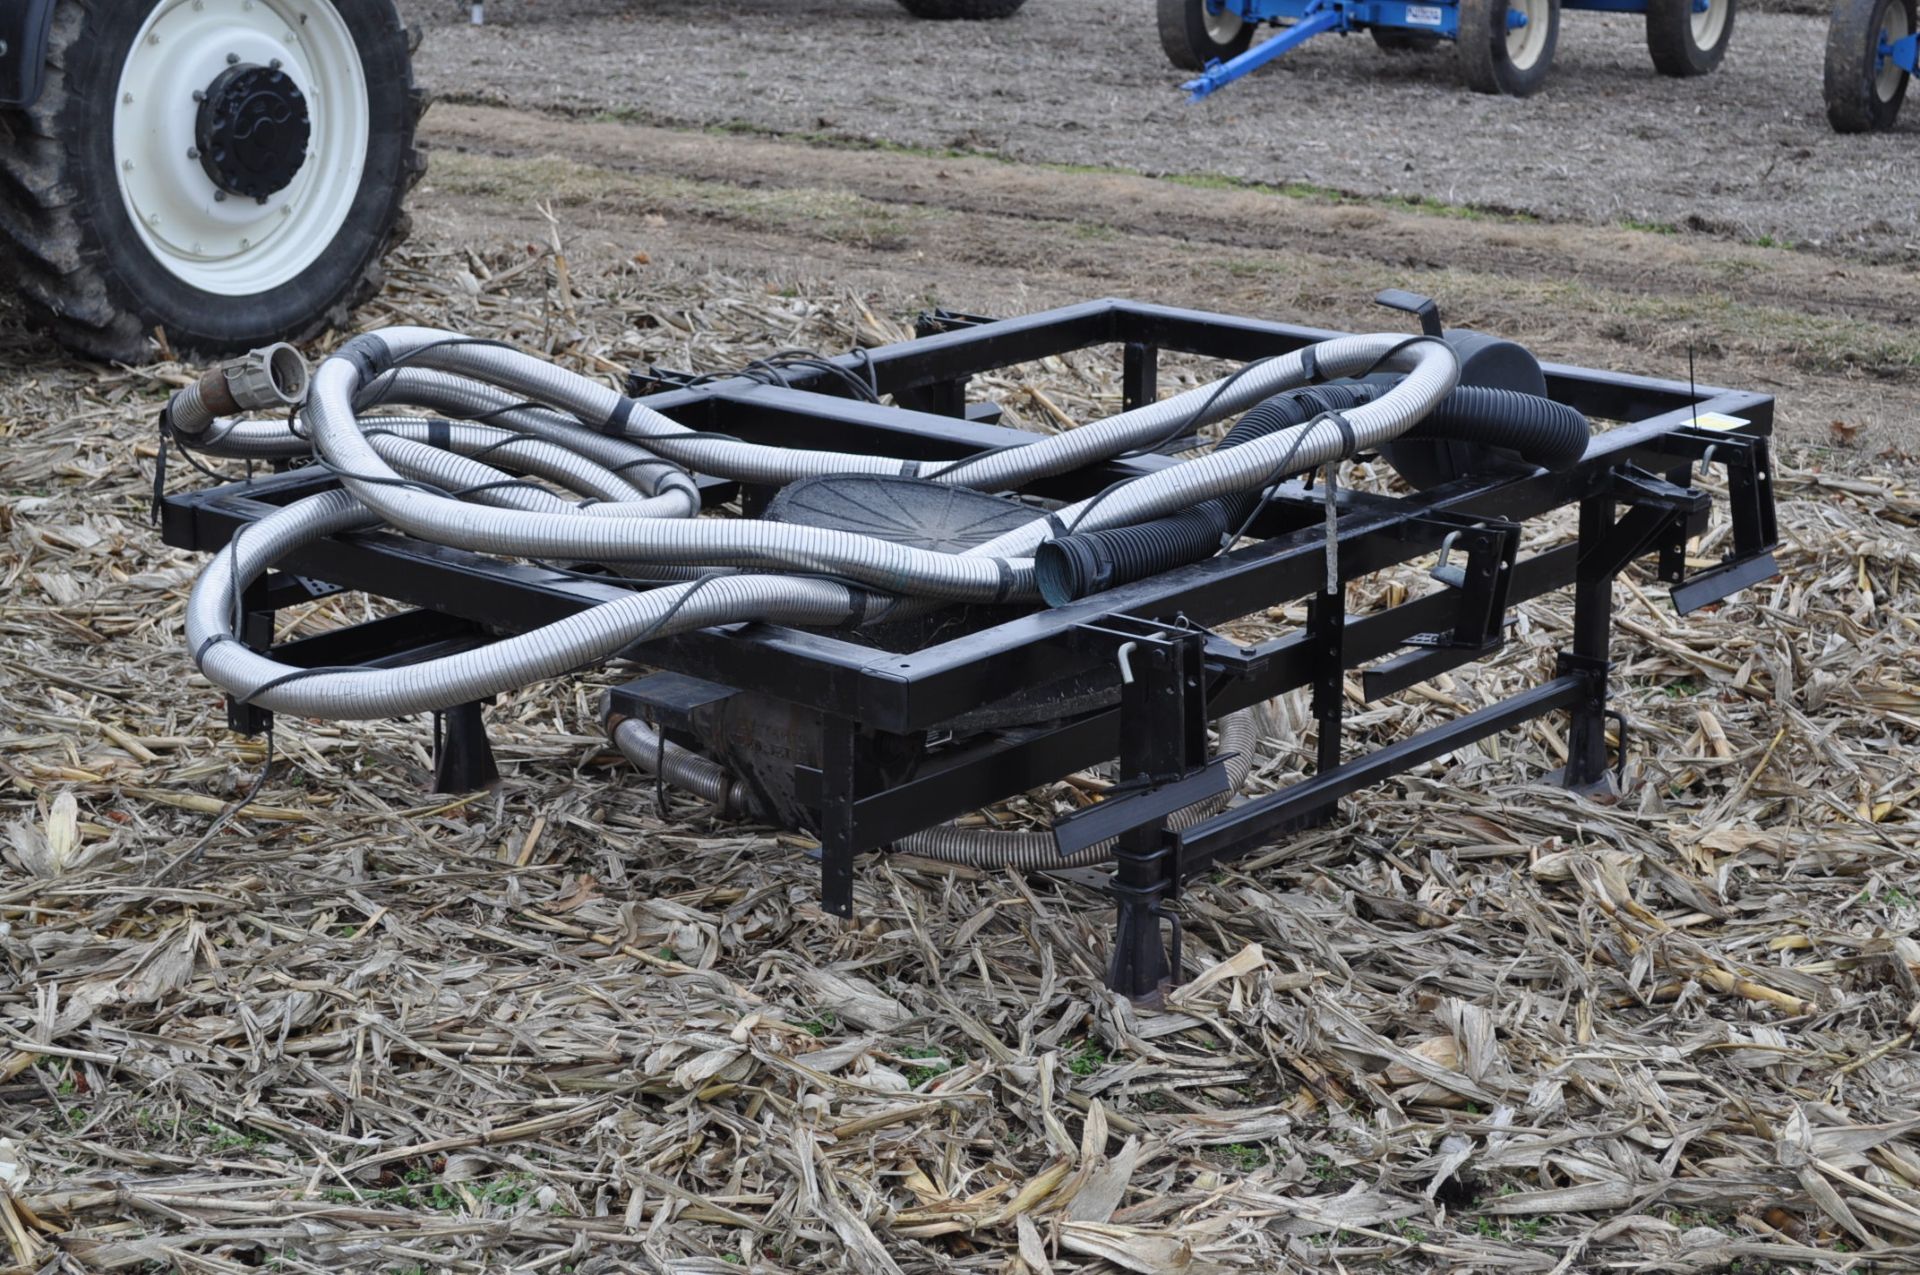 Yetter Seed Jet II air transfer seed tender, holds 2 pro boxes, Briggs & Stratton gas engine - Image 4 of 9